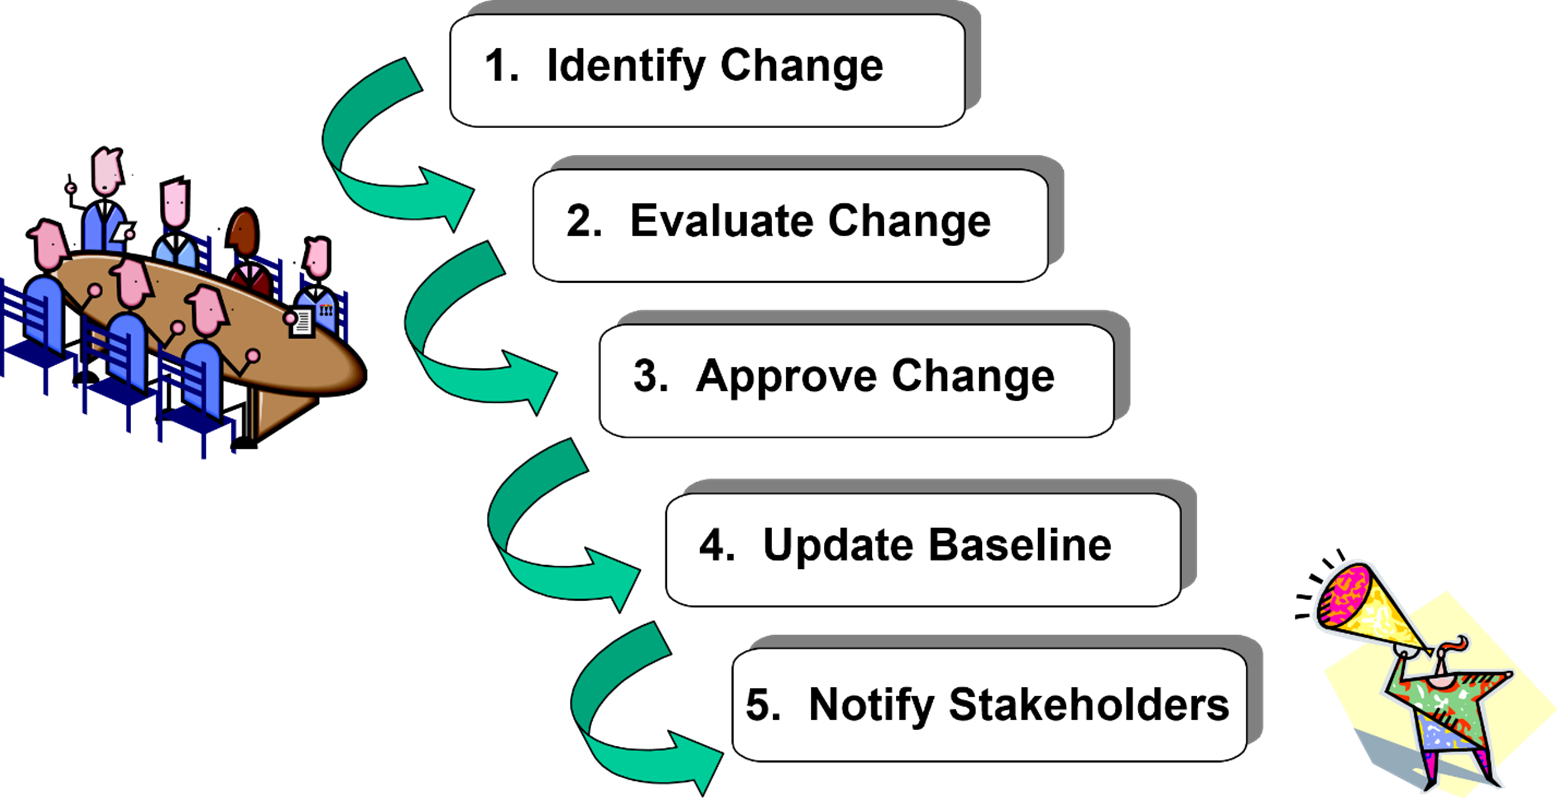 Change Management steps - Identify, Evaluate, and Approve the changes, Update the Baseline, and Notify the Stakeholders as described in the following paragraphs.